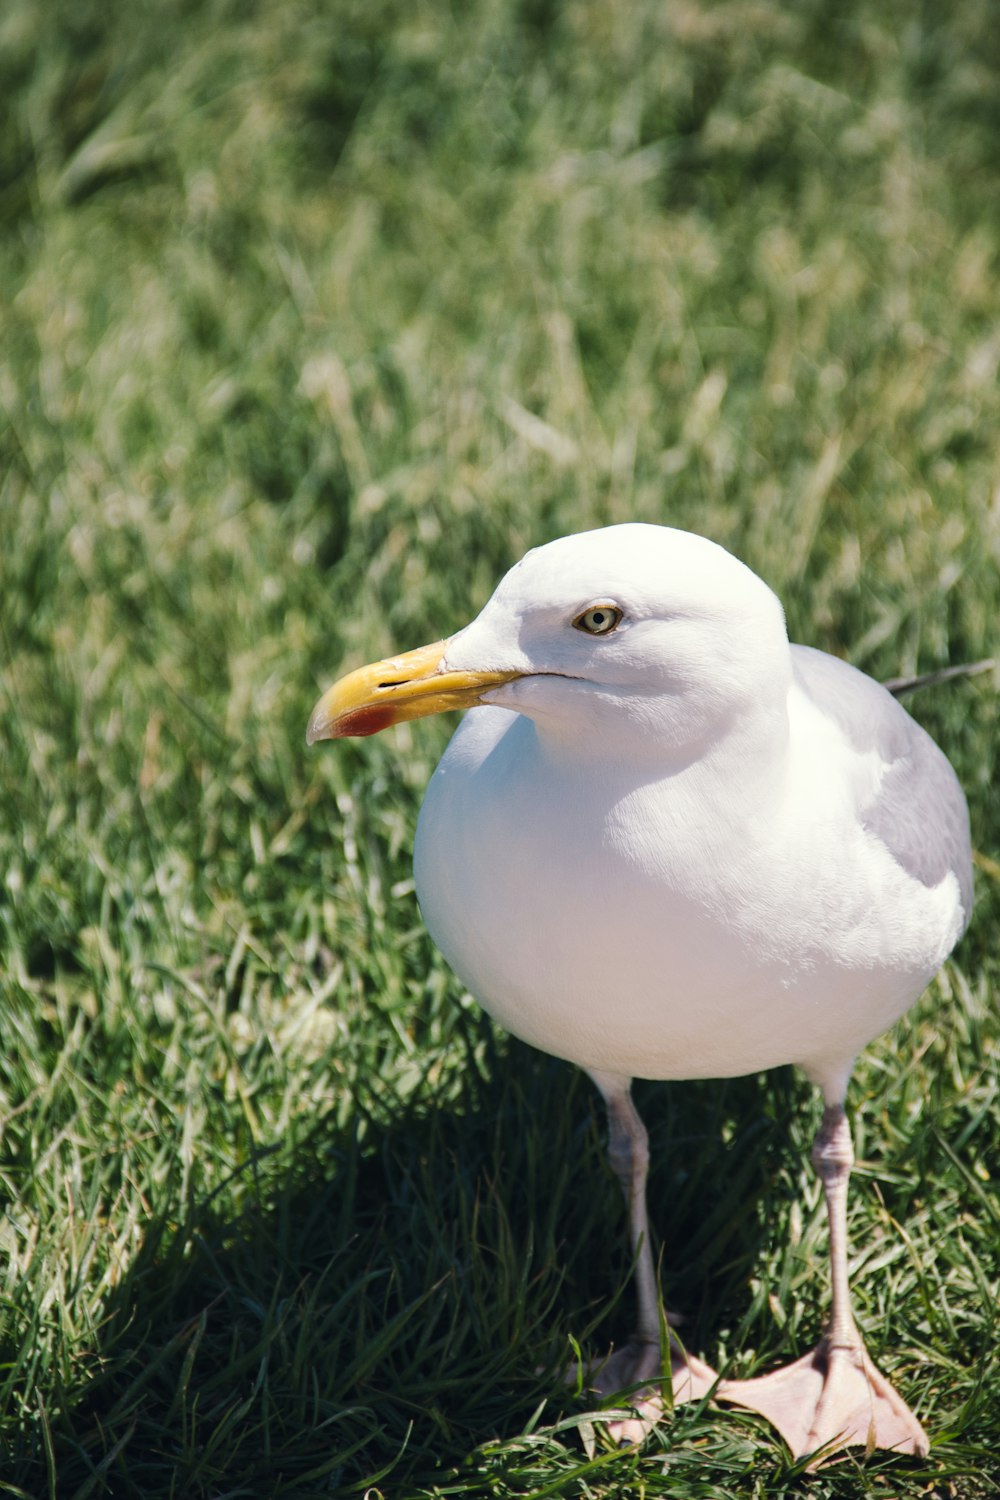 a white bird with a yellow beak standing in the grass